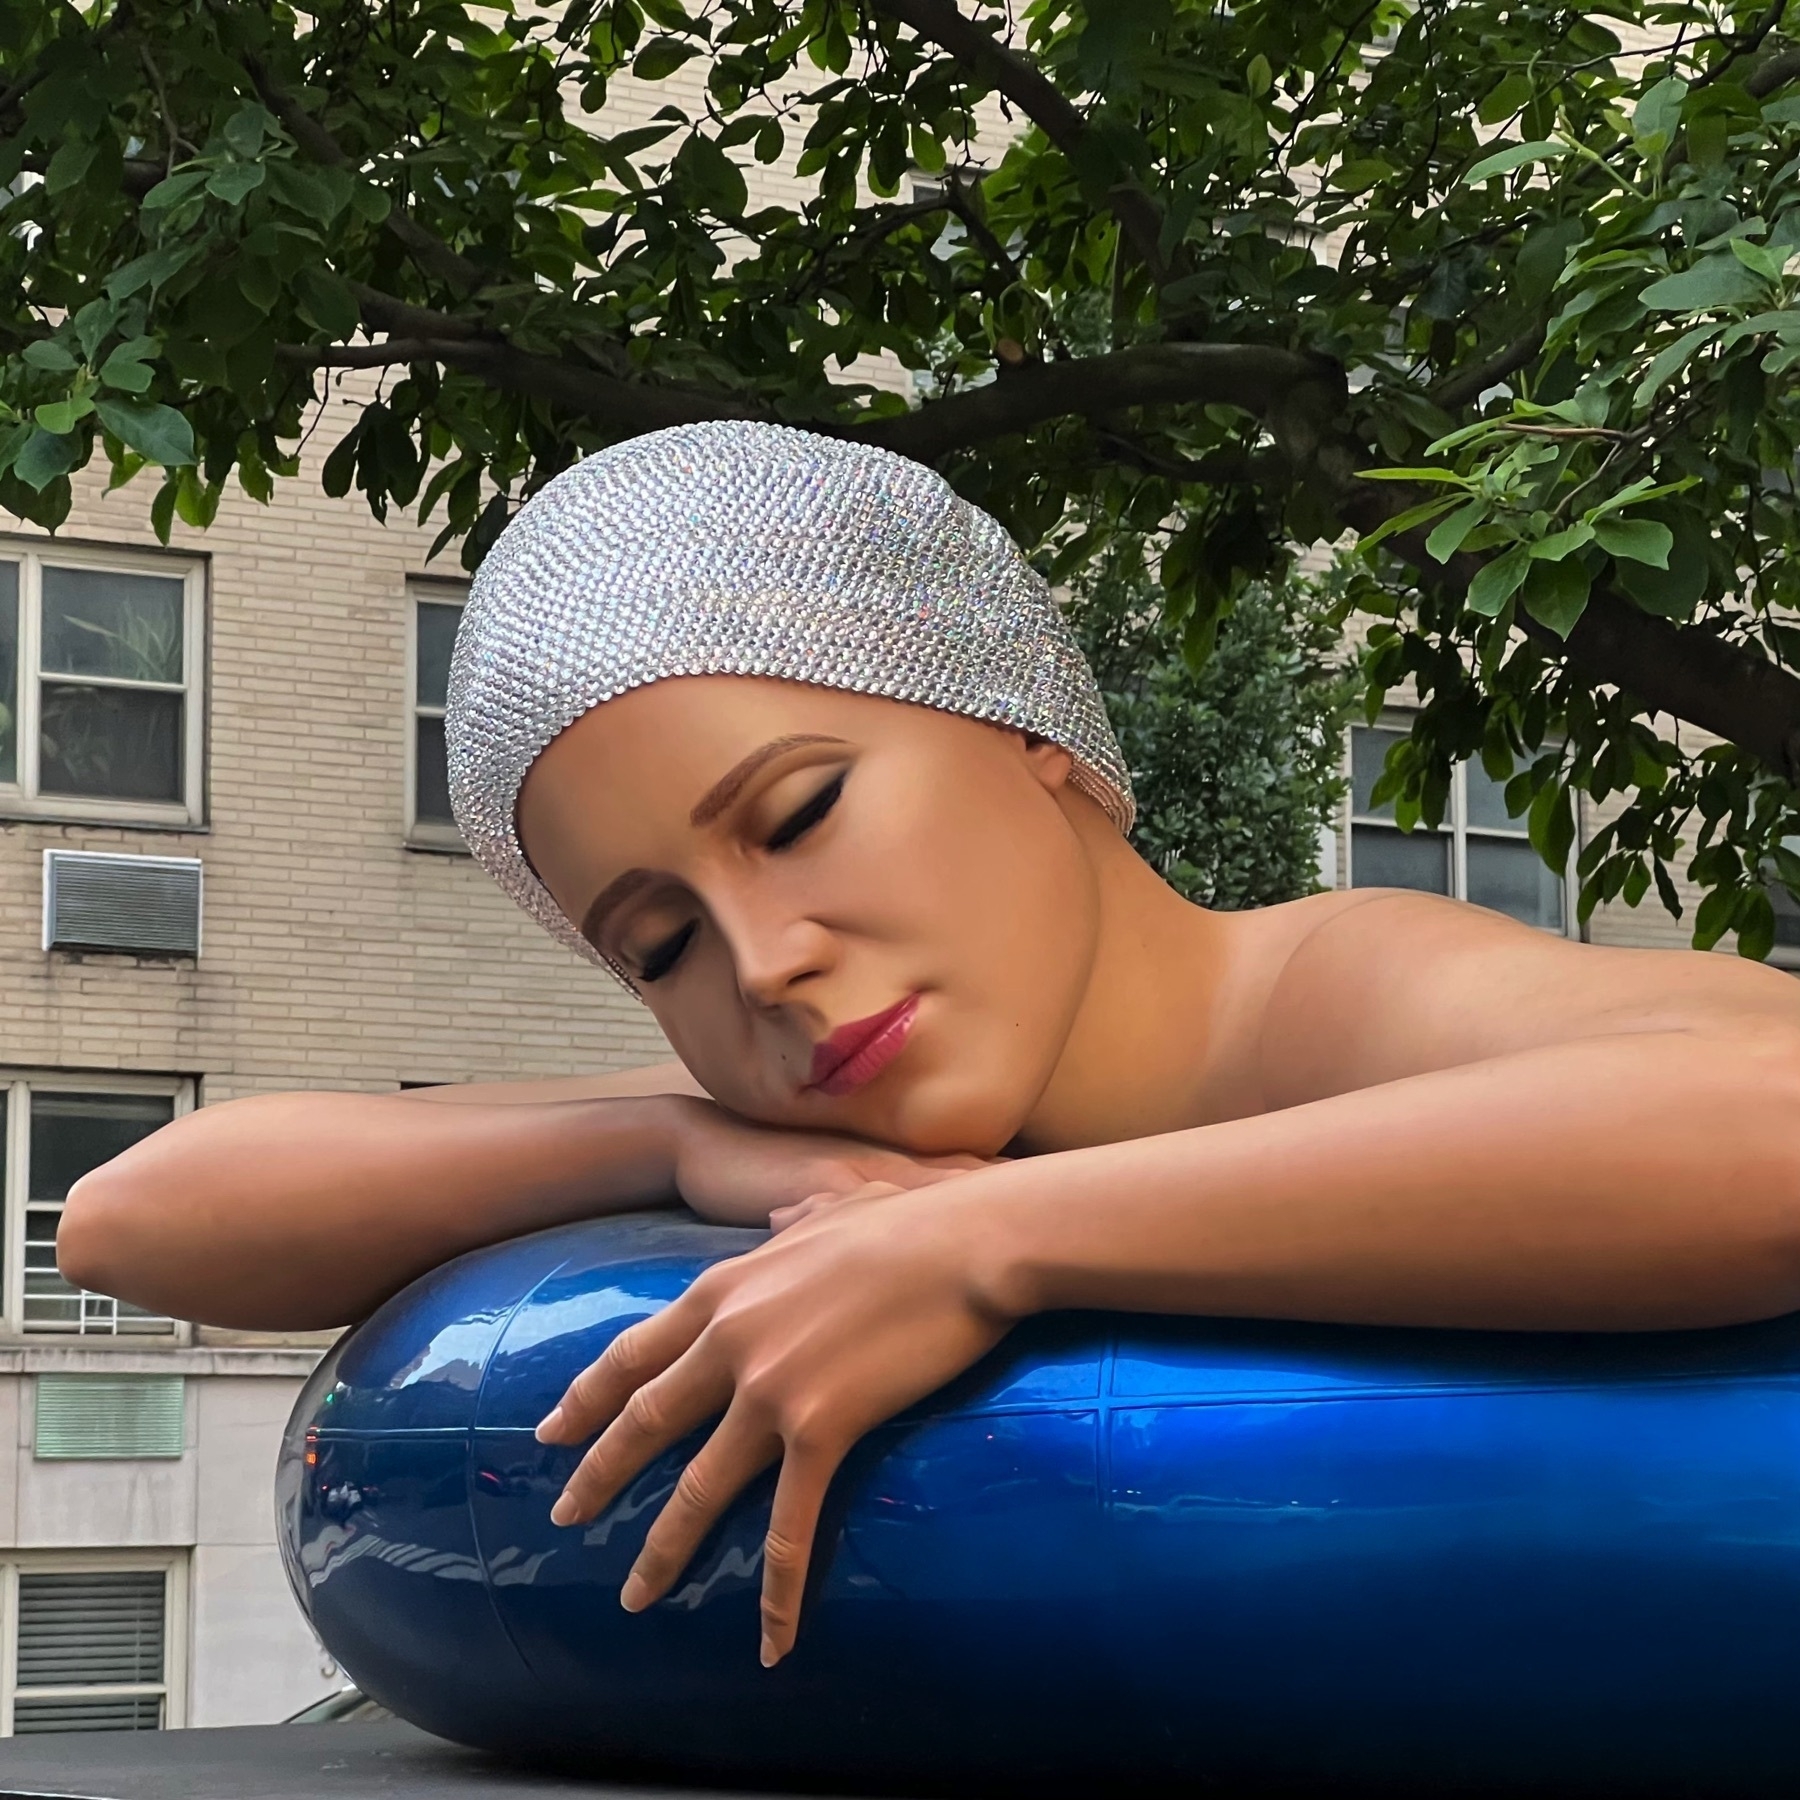 Larger than life realistic sculpture of a woman in a swimcap, resting on an inner tube.